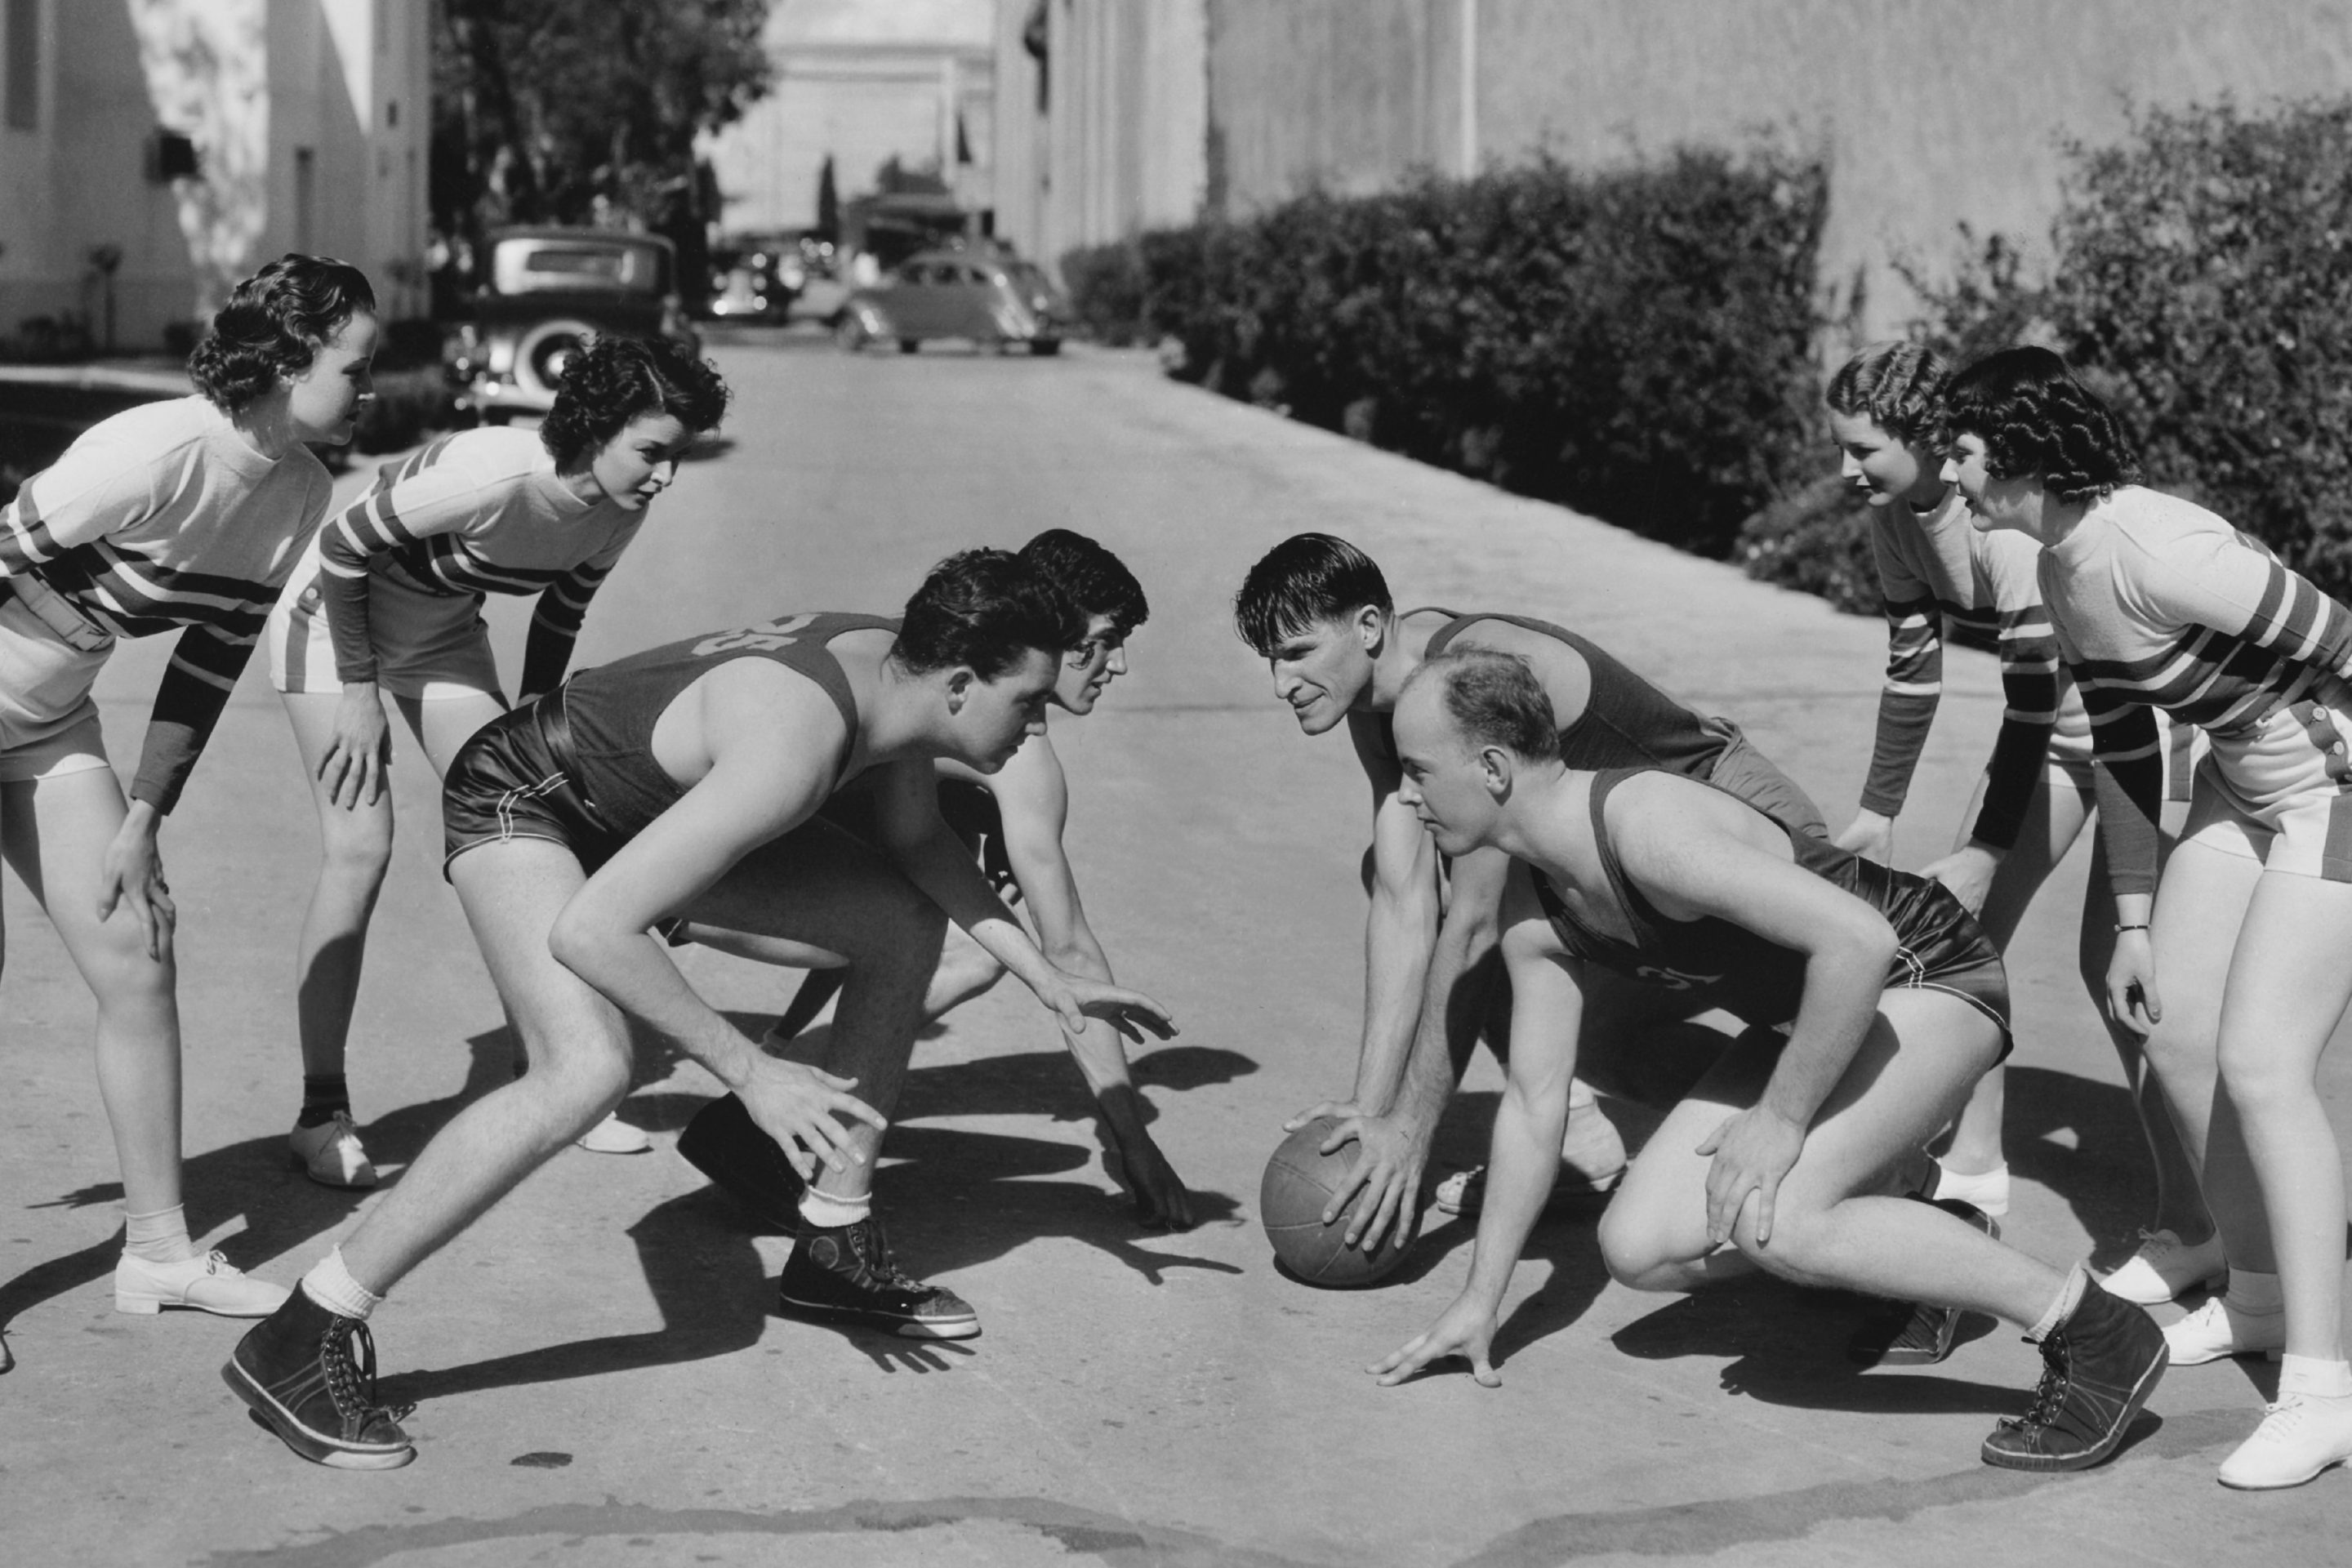 Old-time basketball players, in what appears to be an alley in Los Angeles maybe